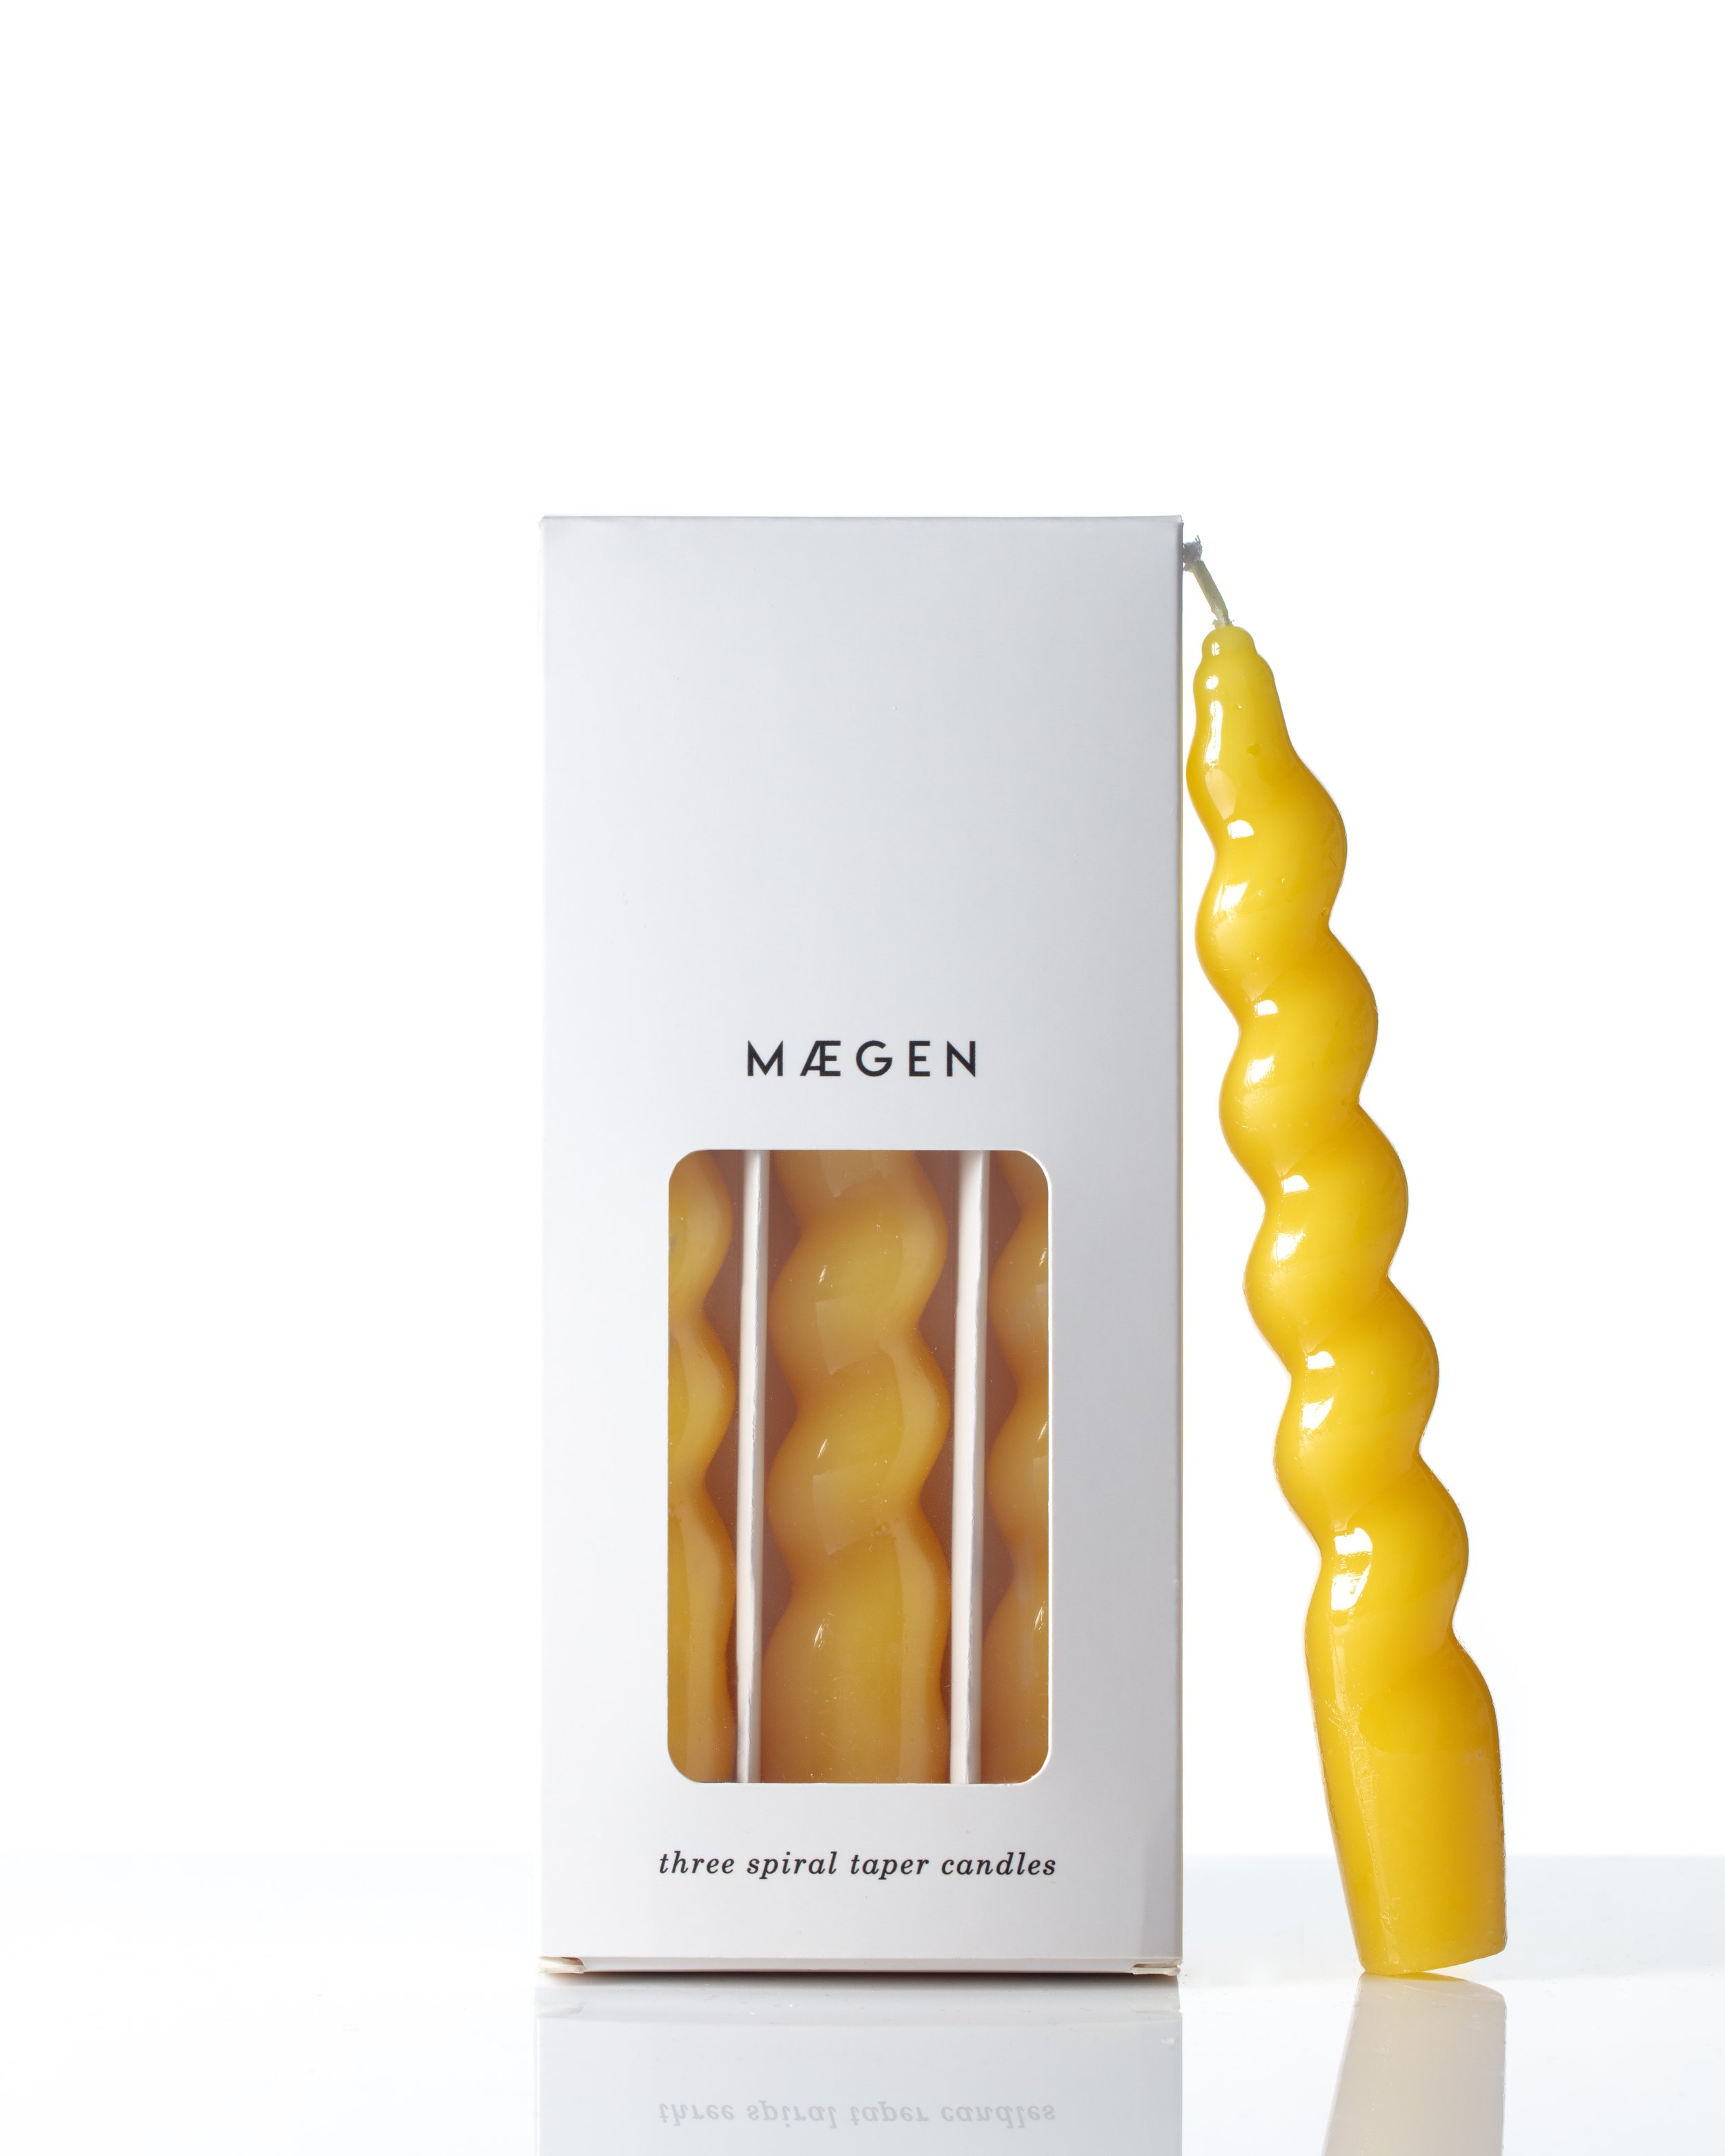 Maegen 18cm Yellow Box of 3 Spiral Taper Candles